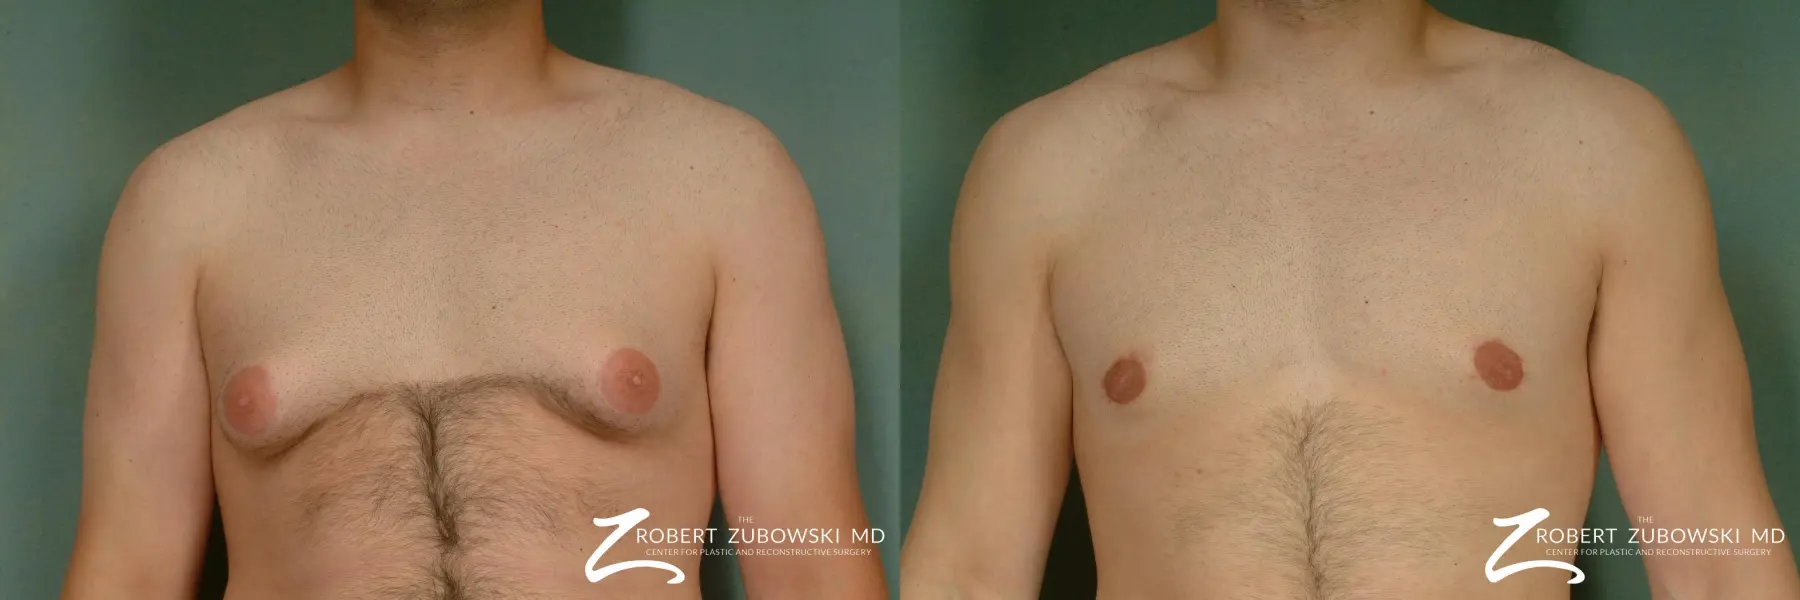 Gynecomastia: Patient 12 - Before and After 1